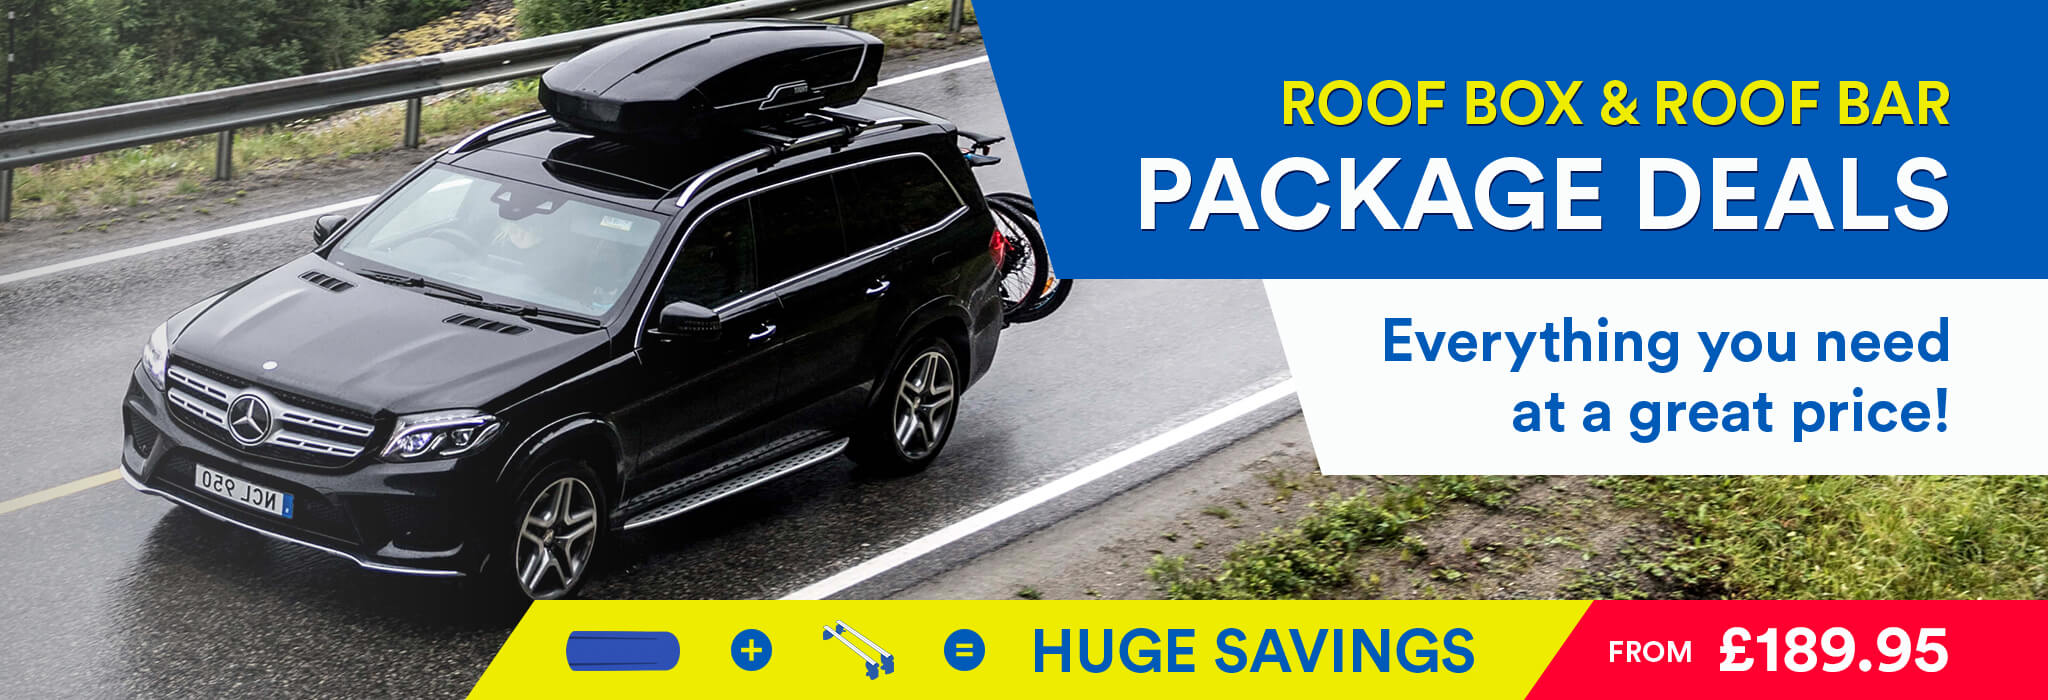 Roofbox package deals: save money by buying roof bars & a roof box